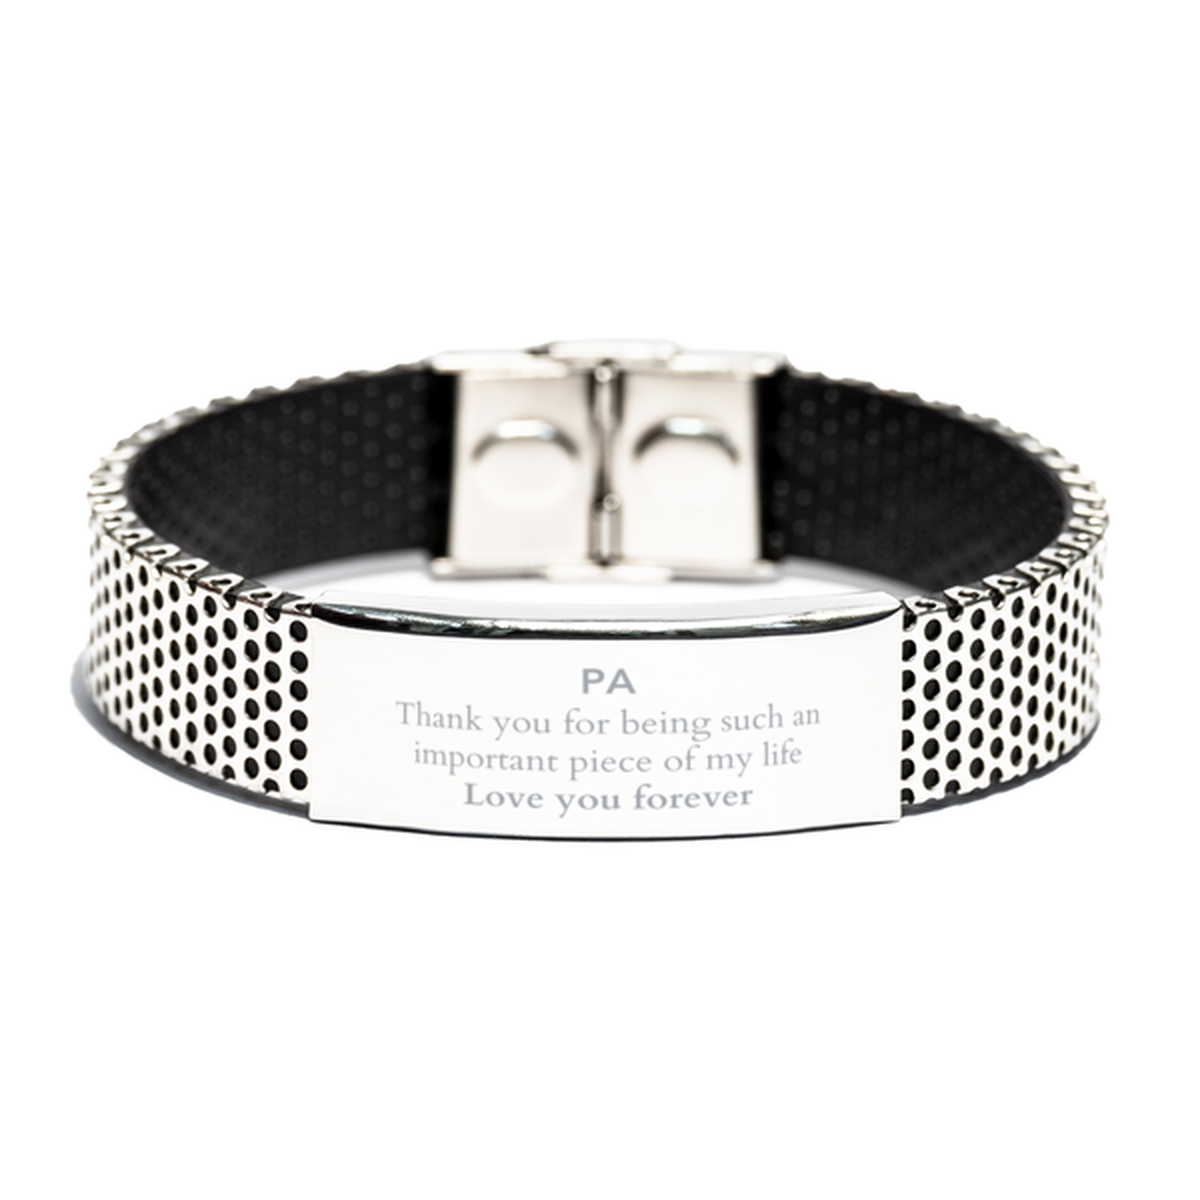 Appropriate Pa Stainless Steel Bracelet Epic Birthday Gifts for Pa Thank you for being such an important piece of my life Pa Christmas Mothers Fathers Day